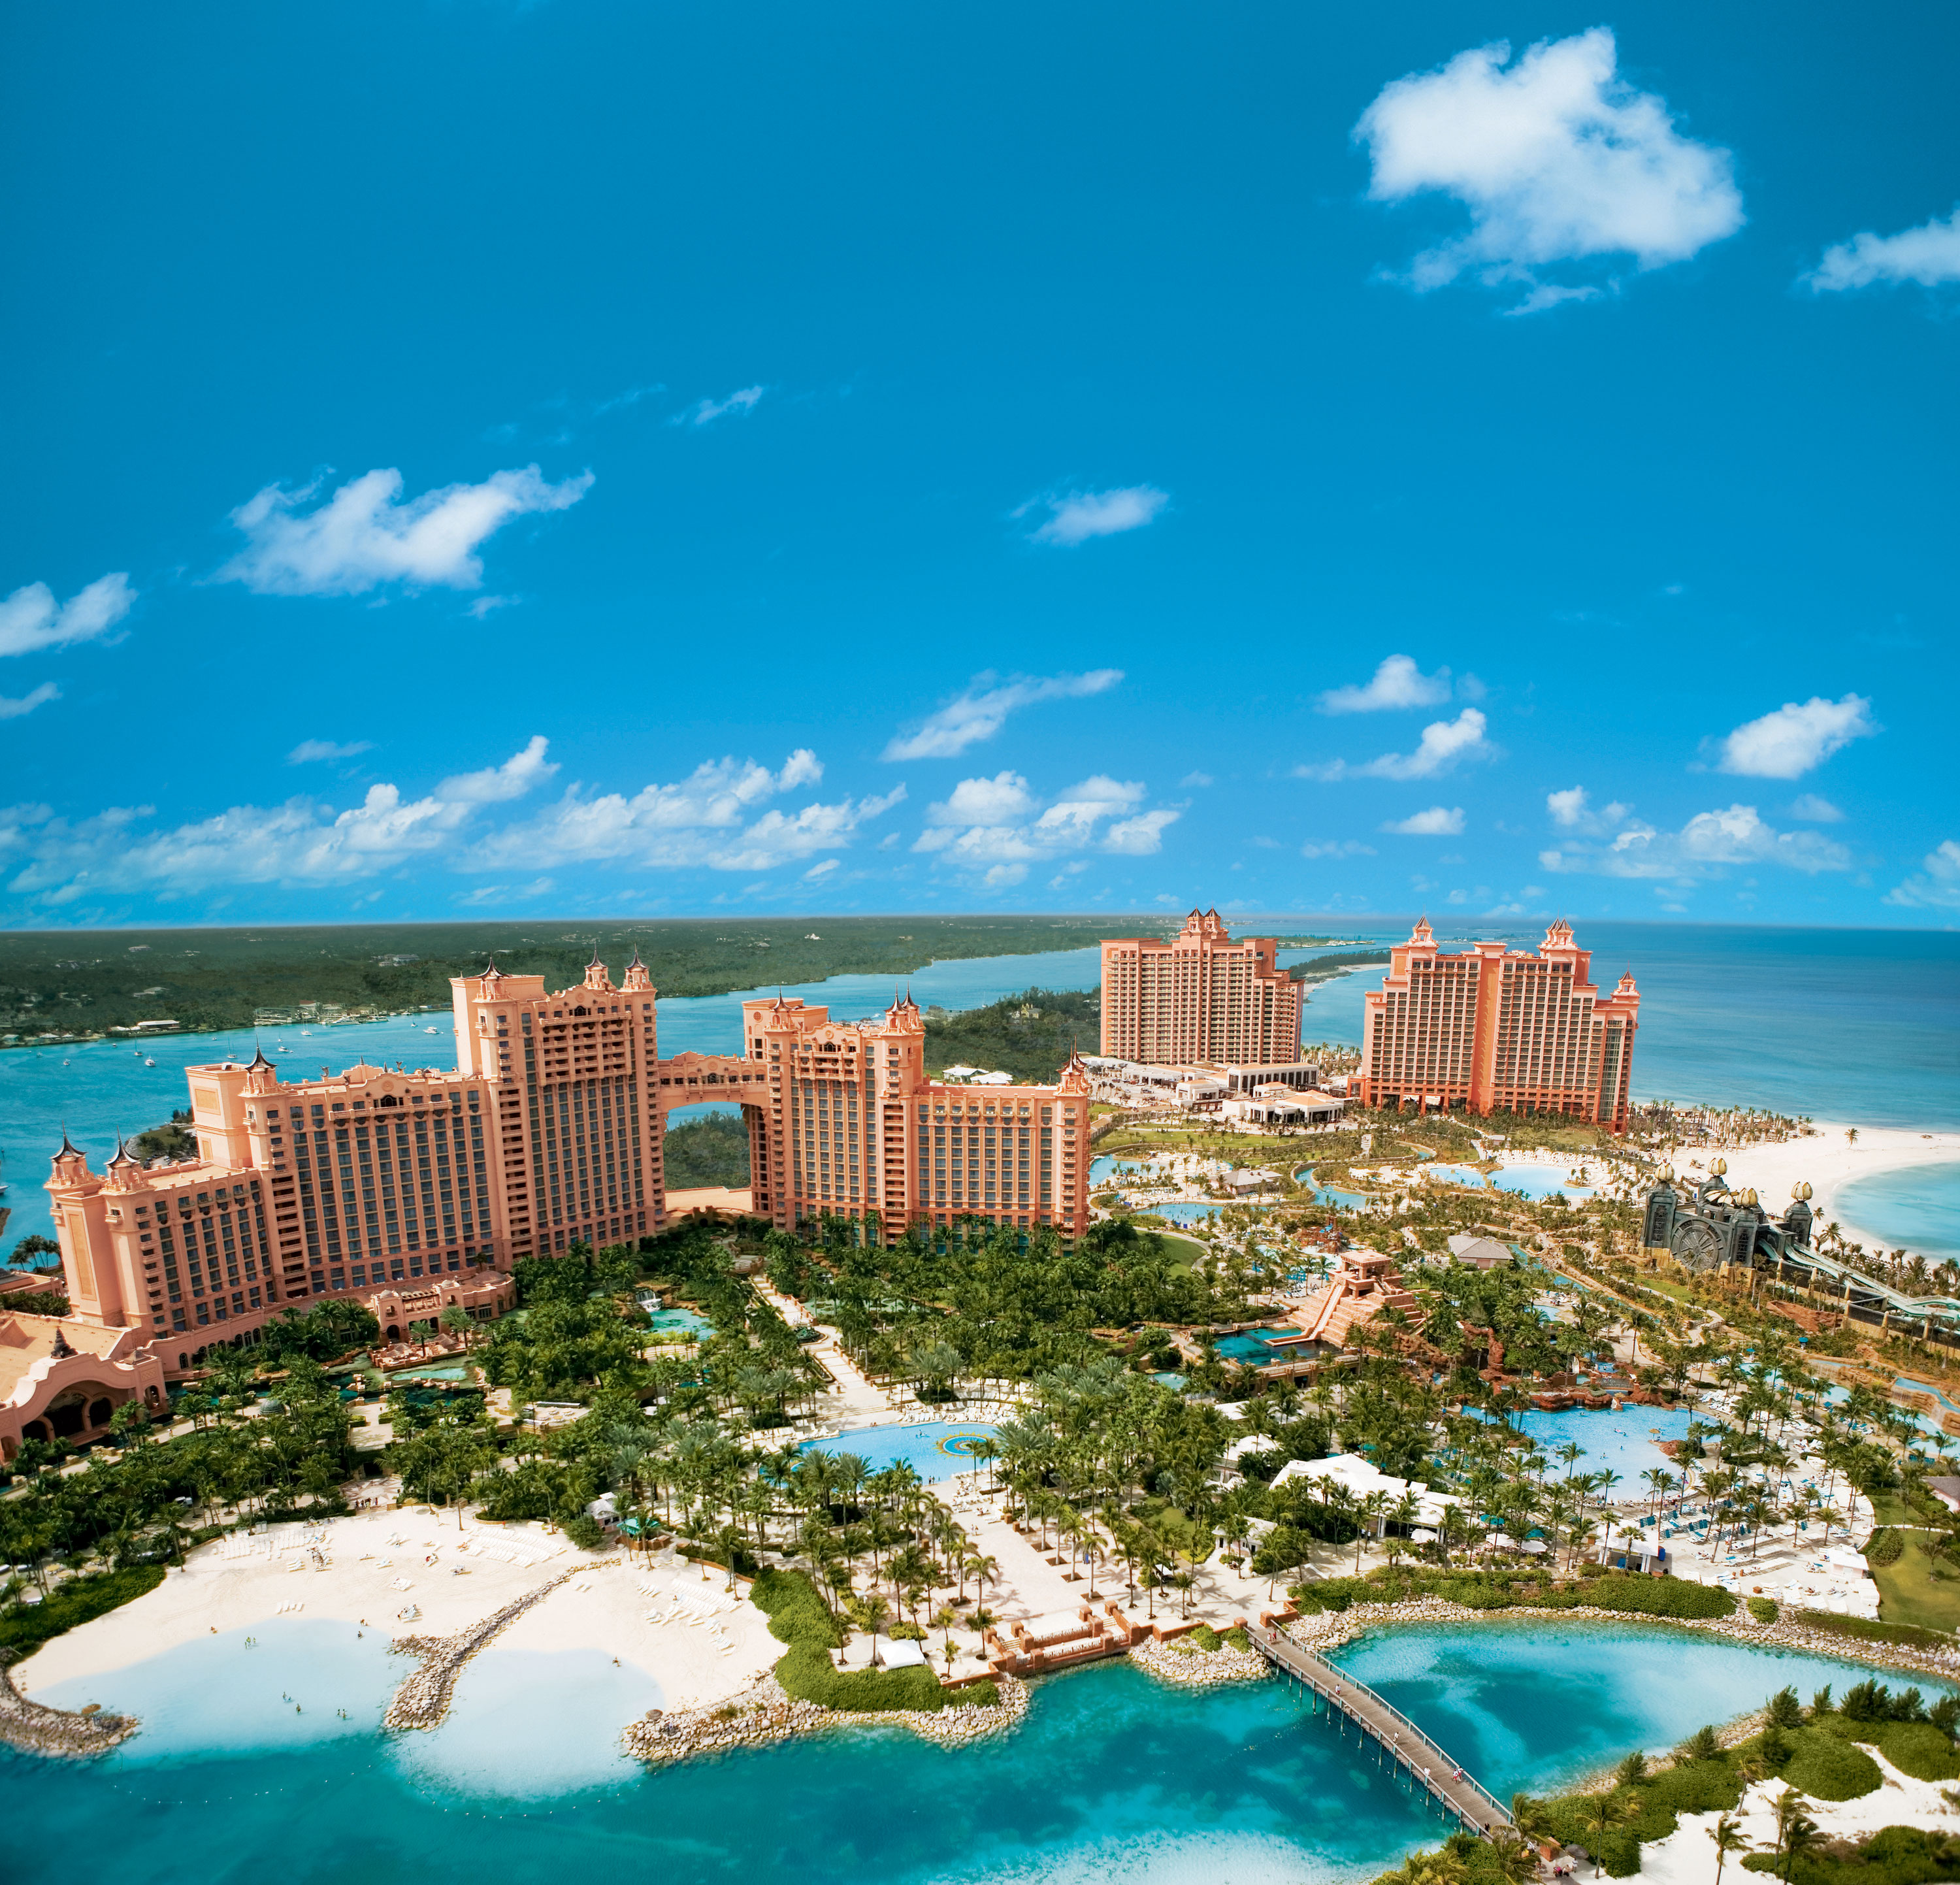 travel packages to atlantis bahamas